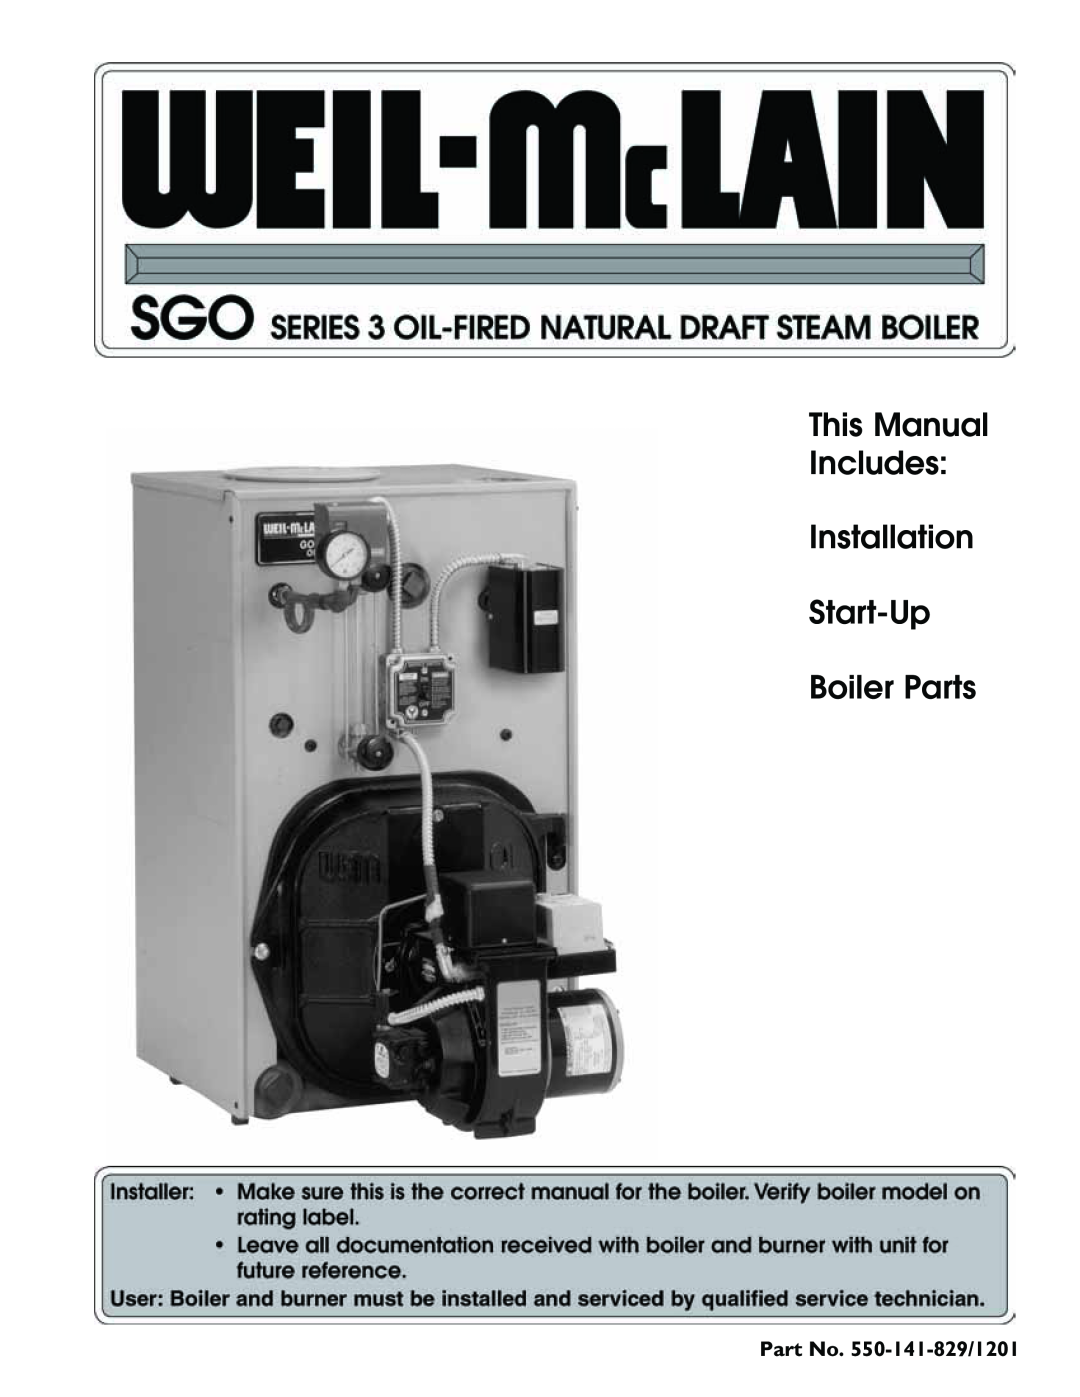 Weil-McLain manual Part No. 550-141-829/1201, This Manual Includes Installation Start-Up, Boiler Parts 